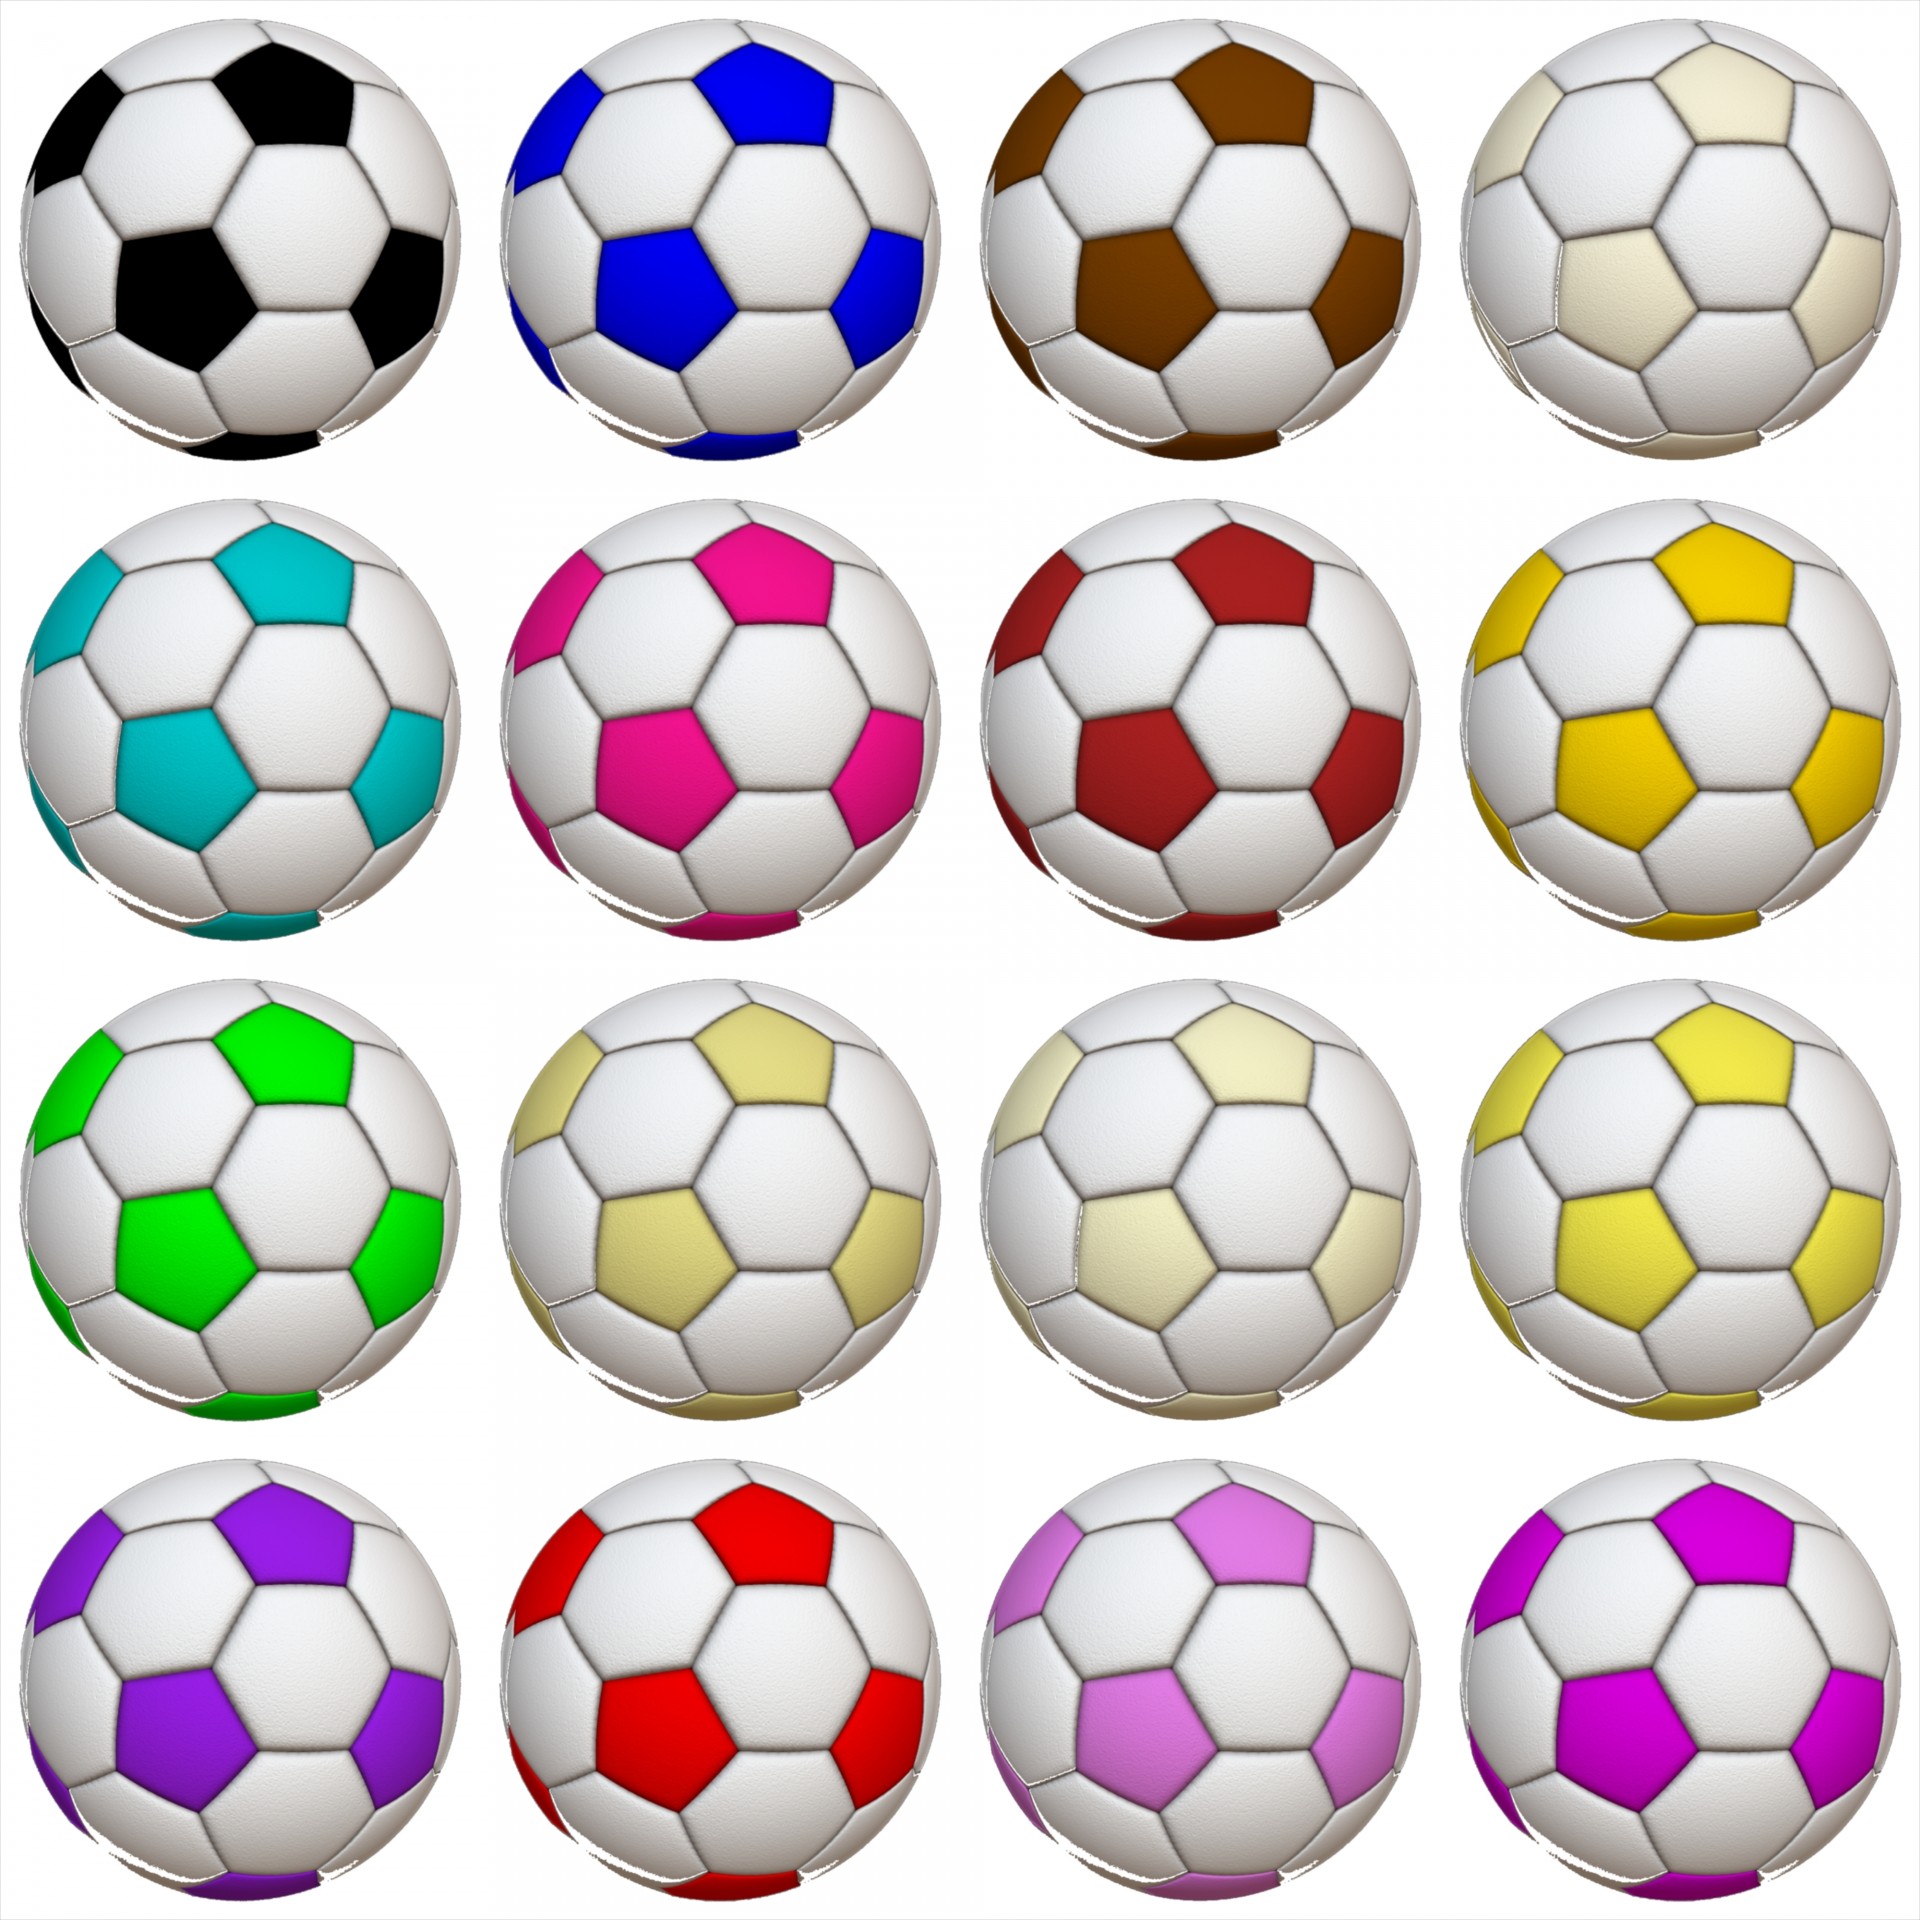 16 color soccer balls isolated on white background